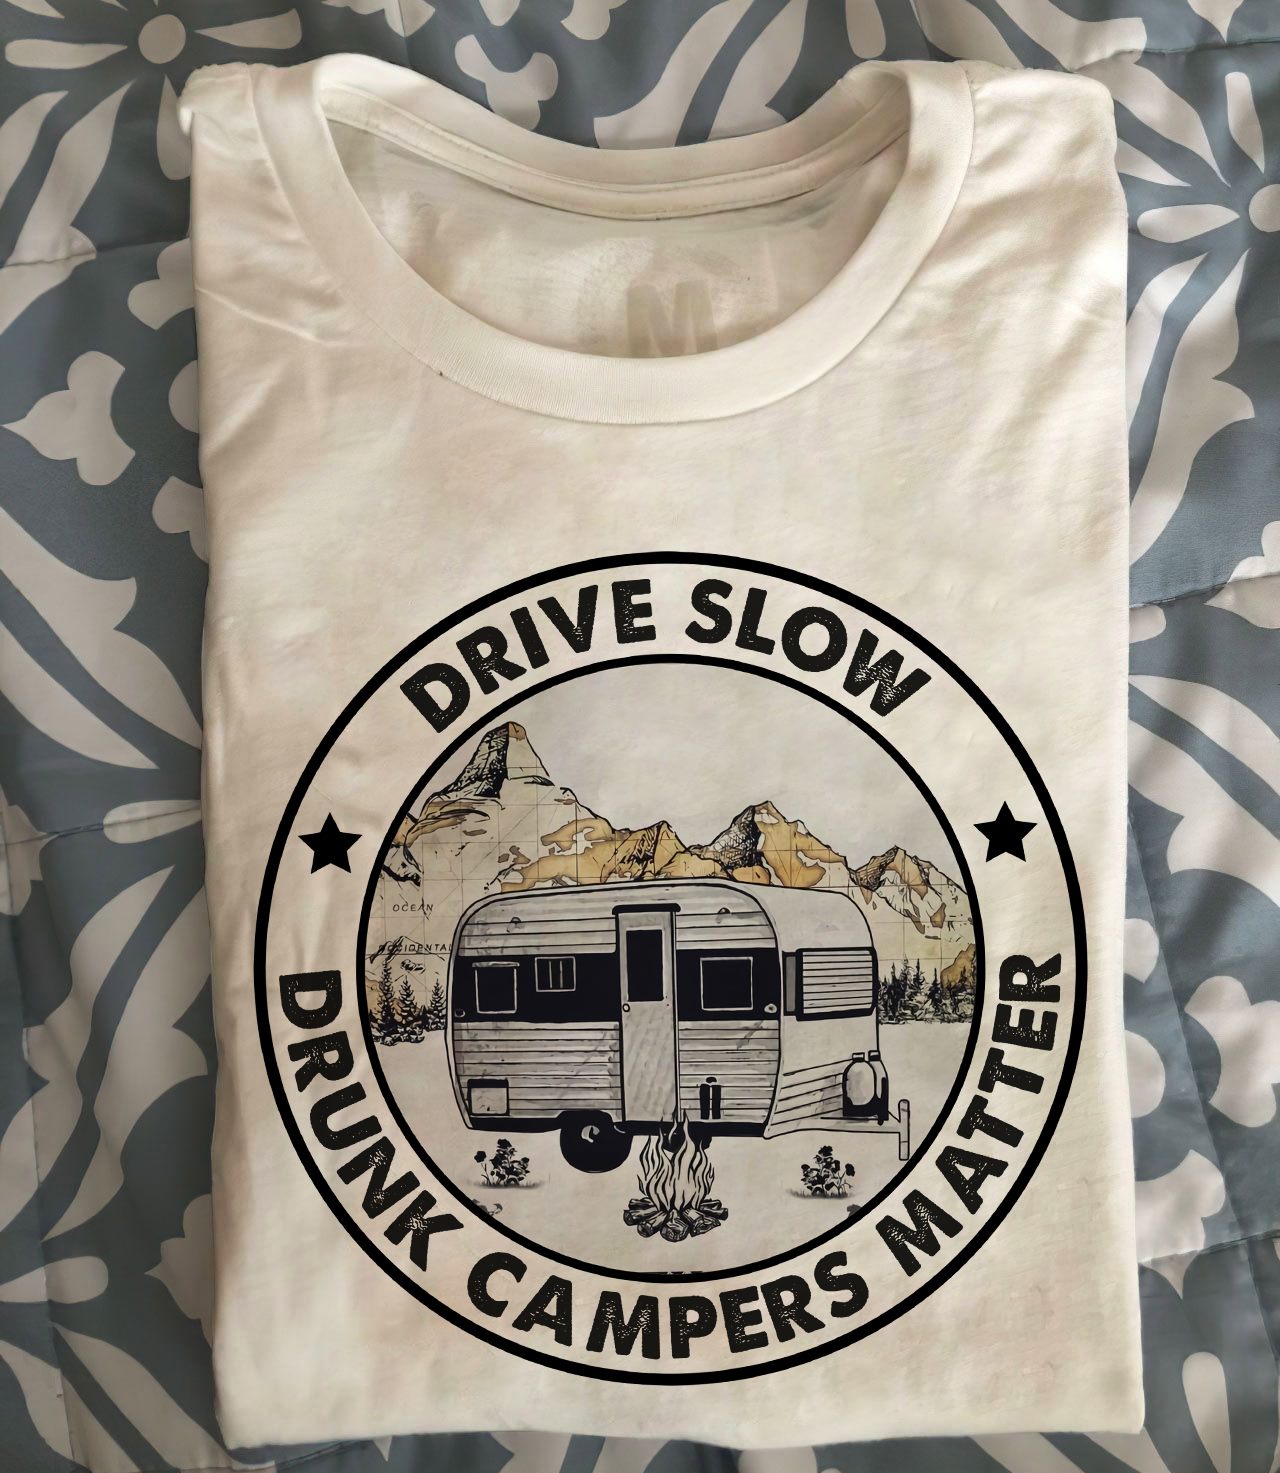 Drive slow drunk campers matter - Love camping